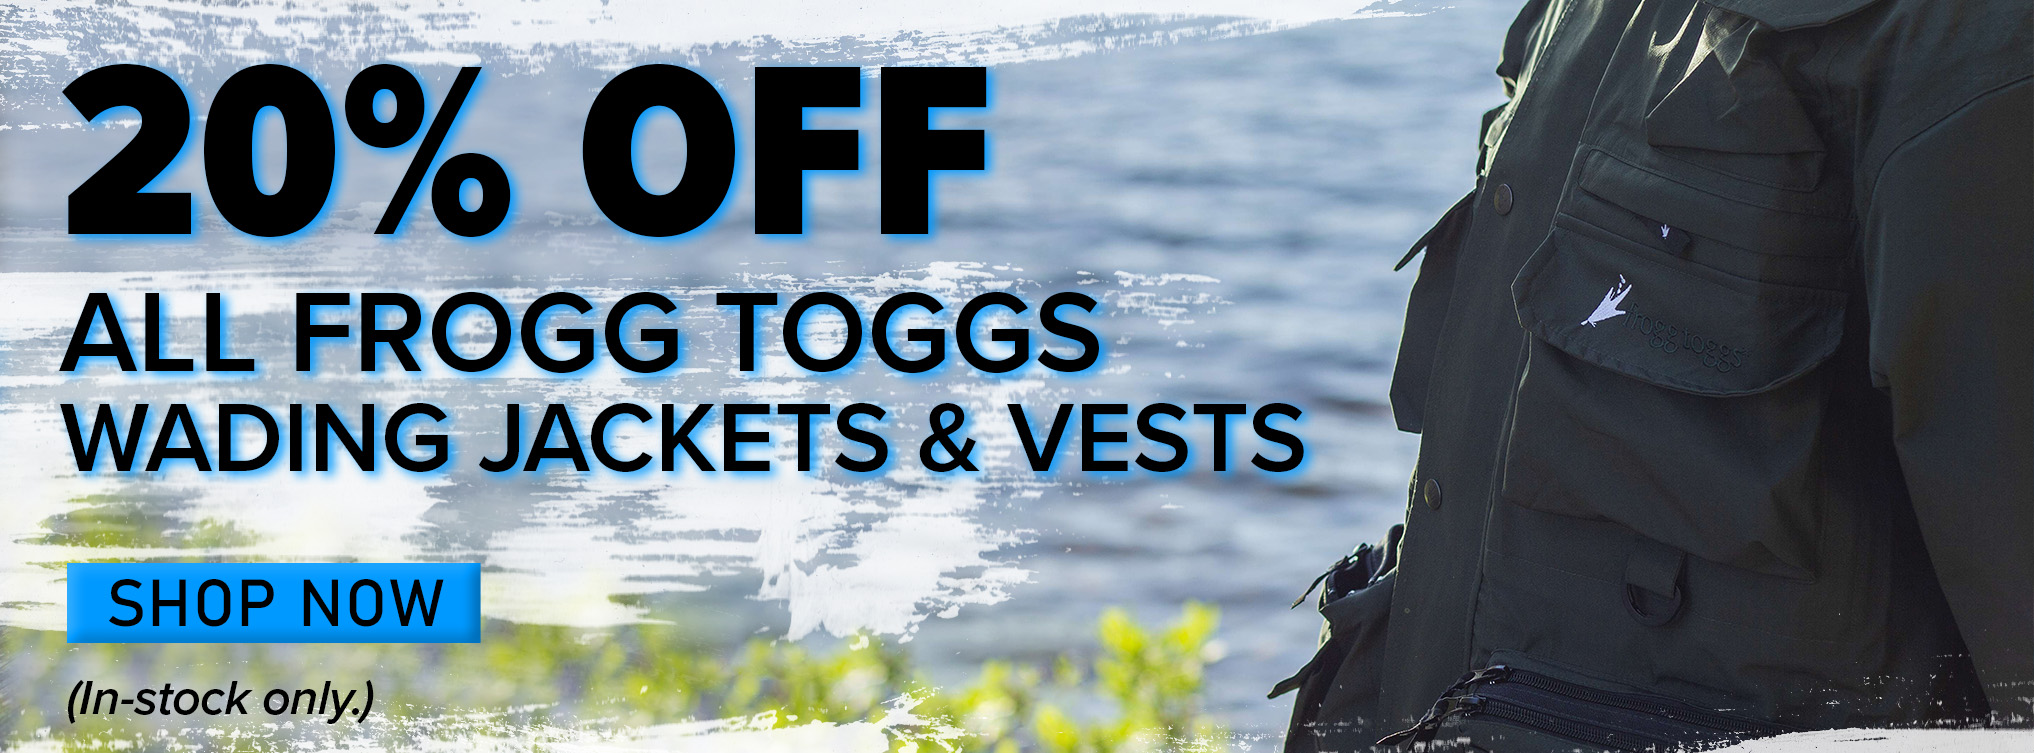 20% Off All Frogg Toggs Wading Jackets & Vests Shop Now (In-stock only.)